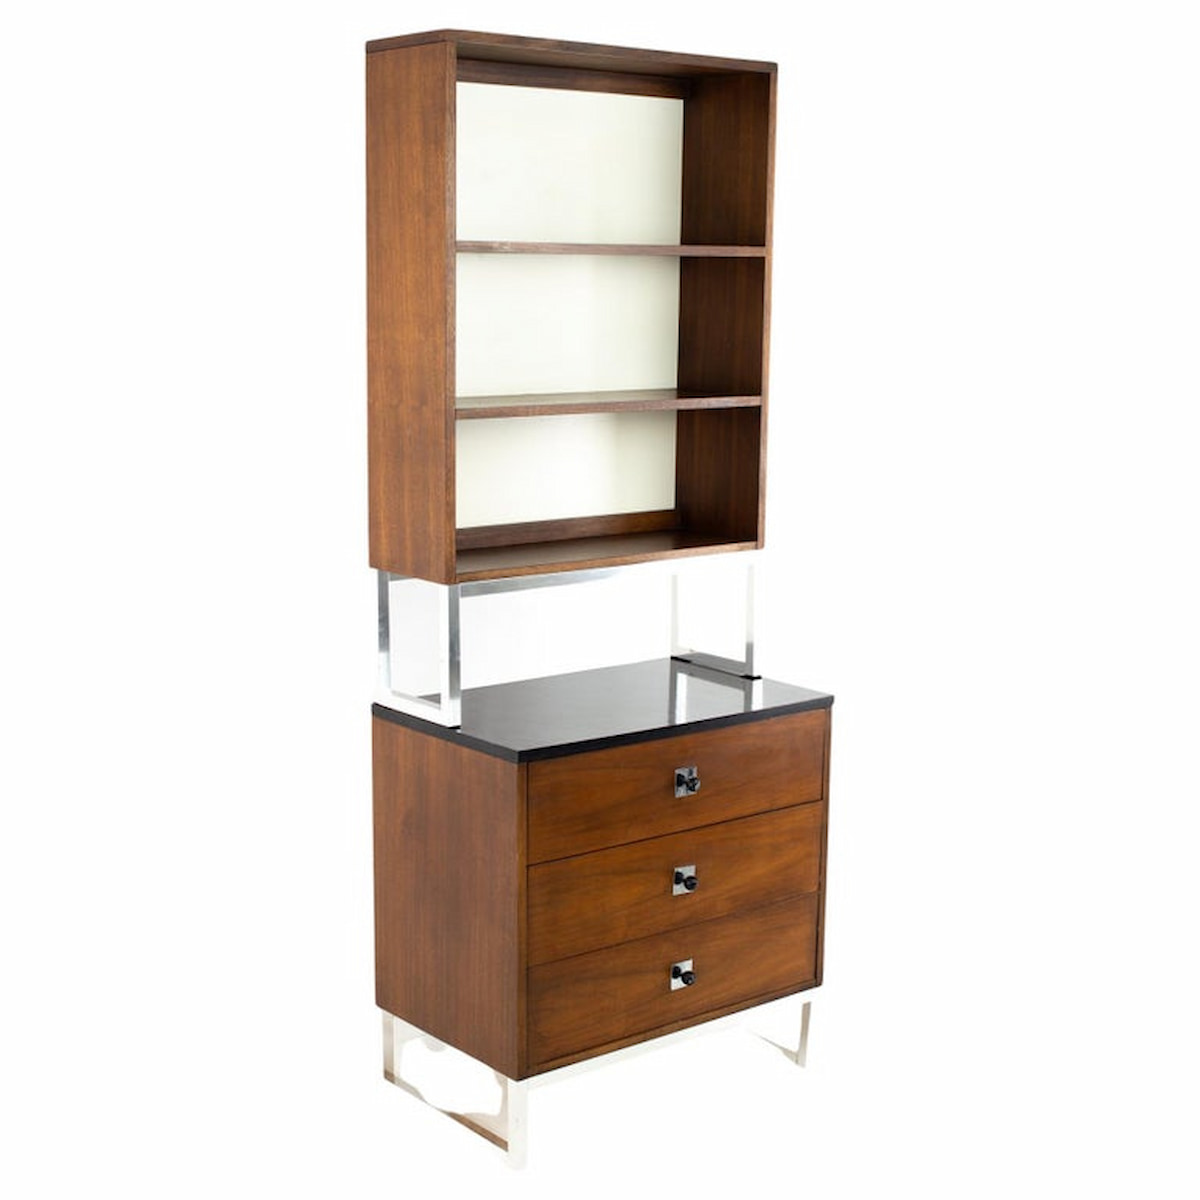 George Nelson Style Thomasville Mid Century Walnut Chrome and Black Formica Bookcase